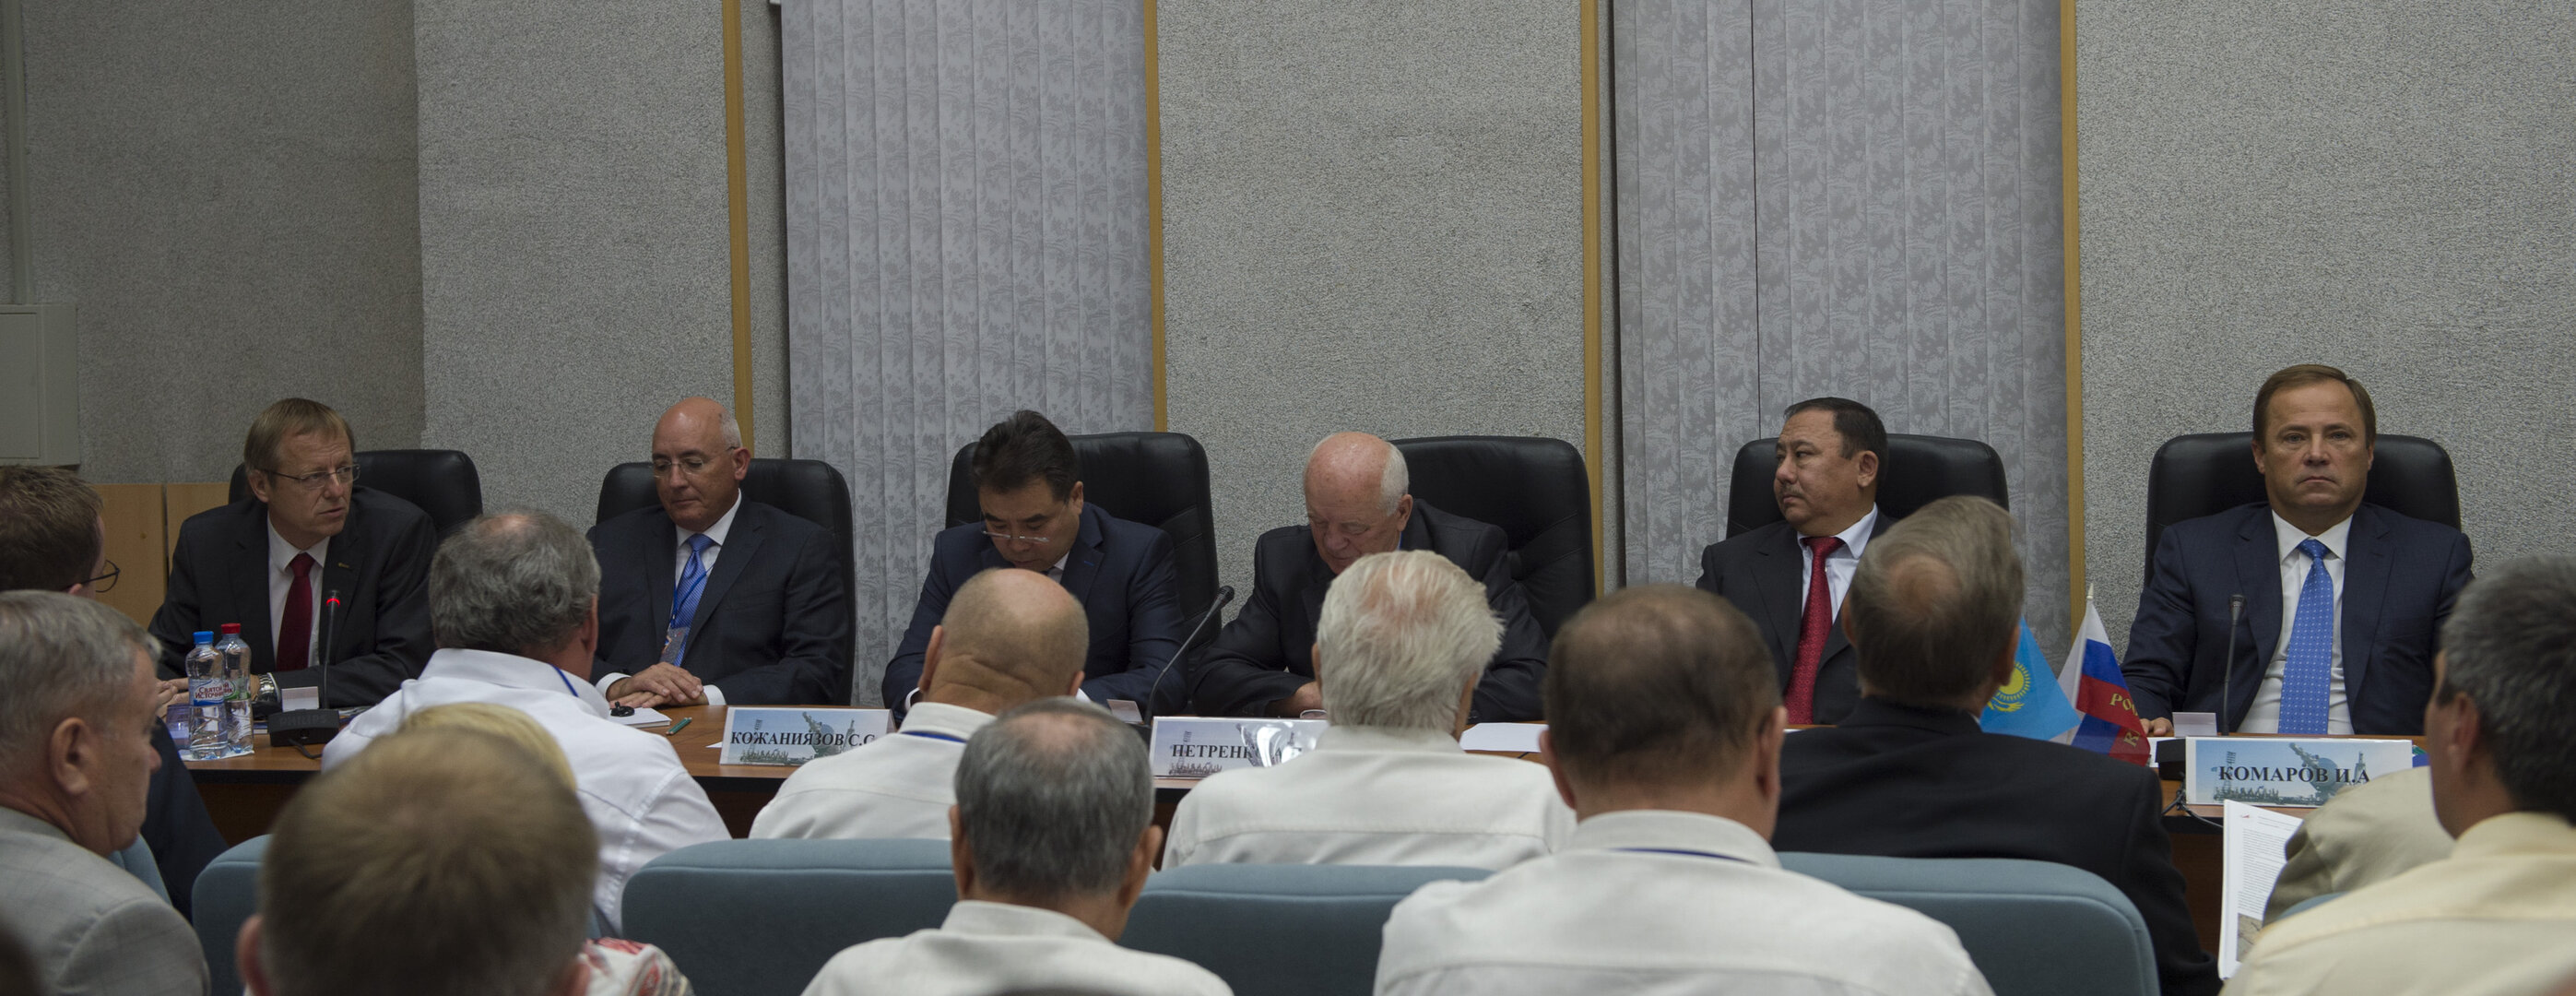 ESA - State Commission meeting to approve the Soyuz launch